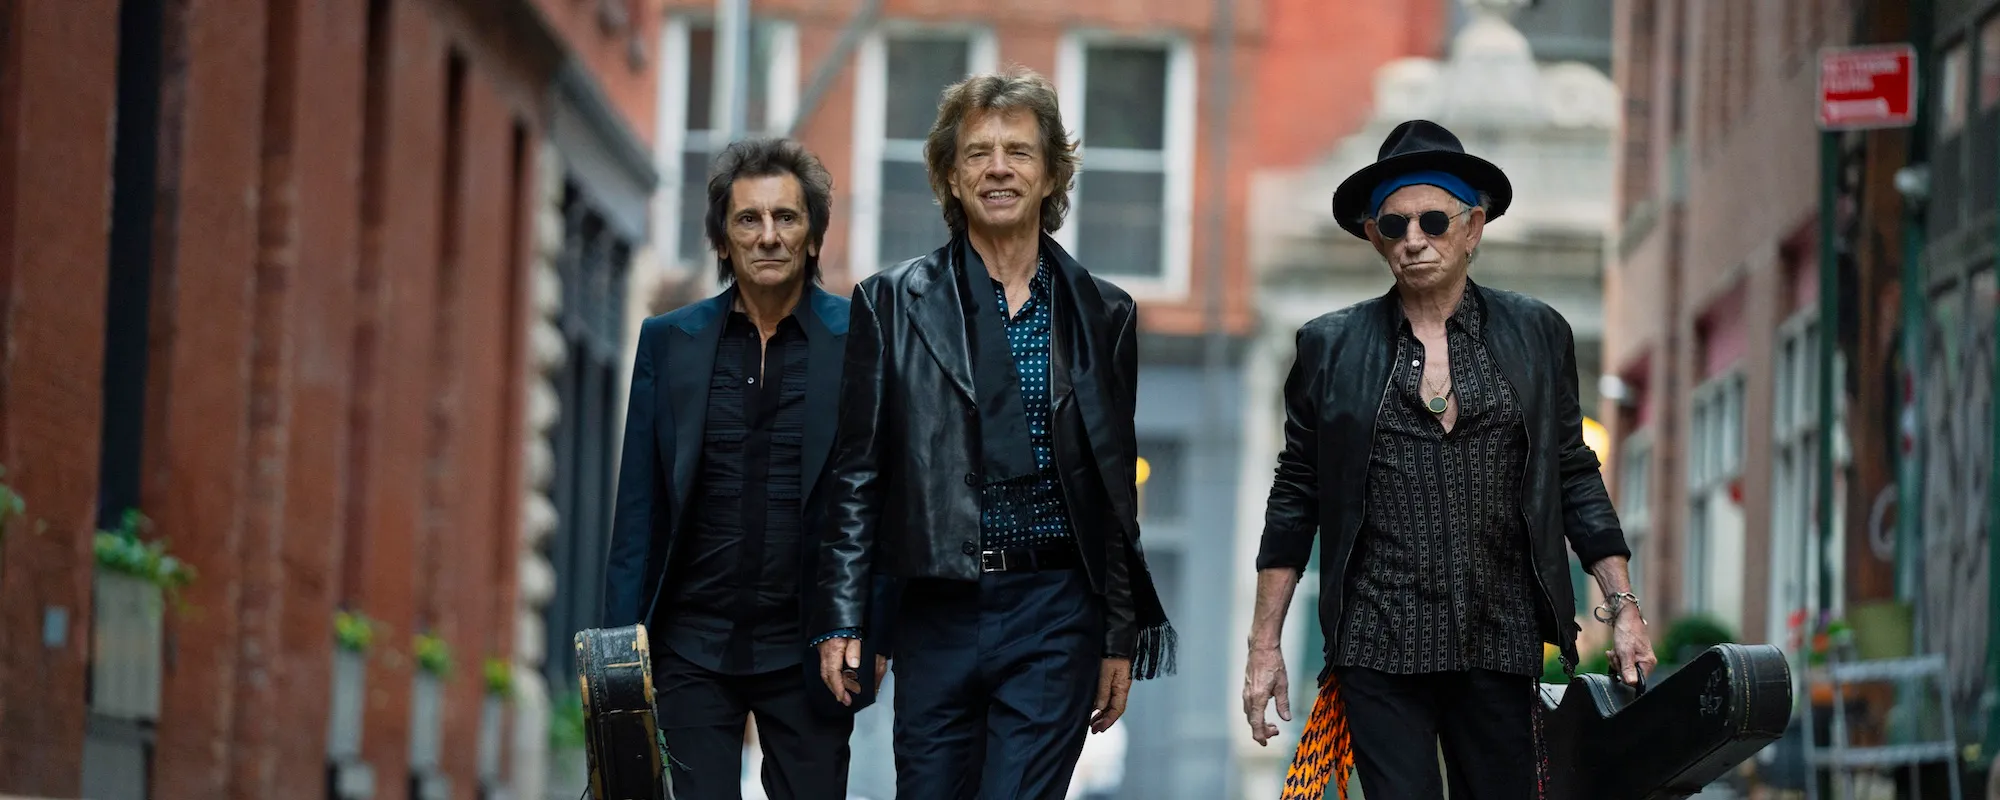 The Rolling Stones Tease “Mess It Up” Music Video; Announce Archival Vinyl Singles Box Set